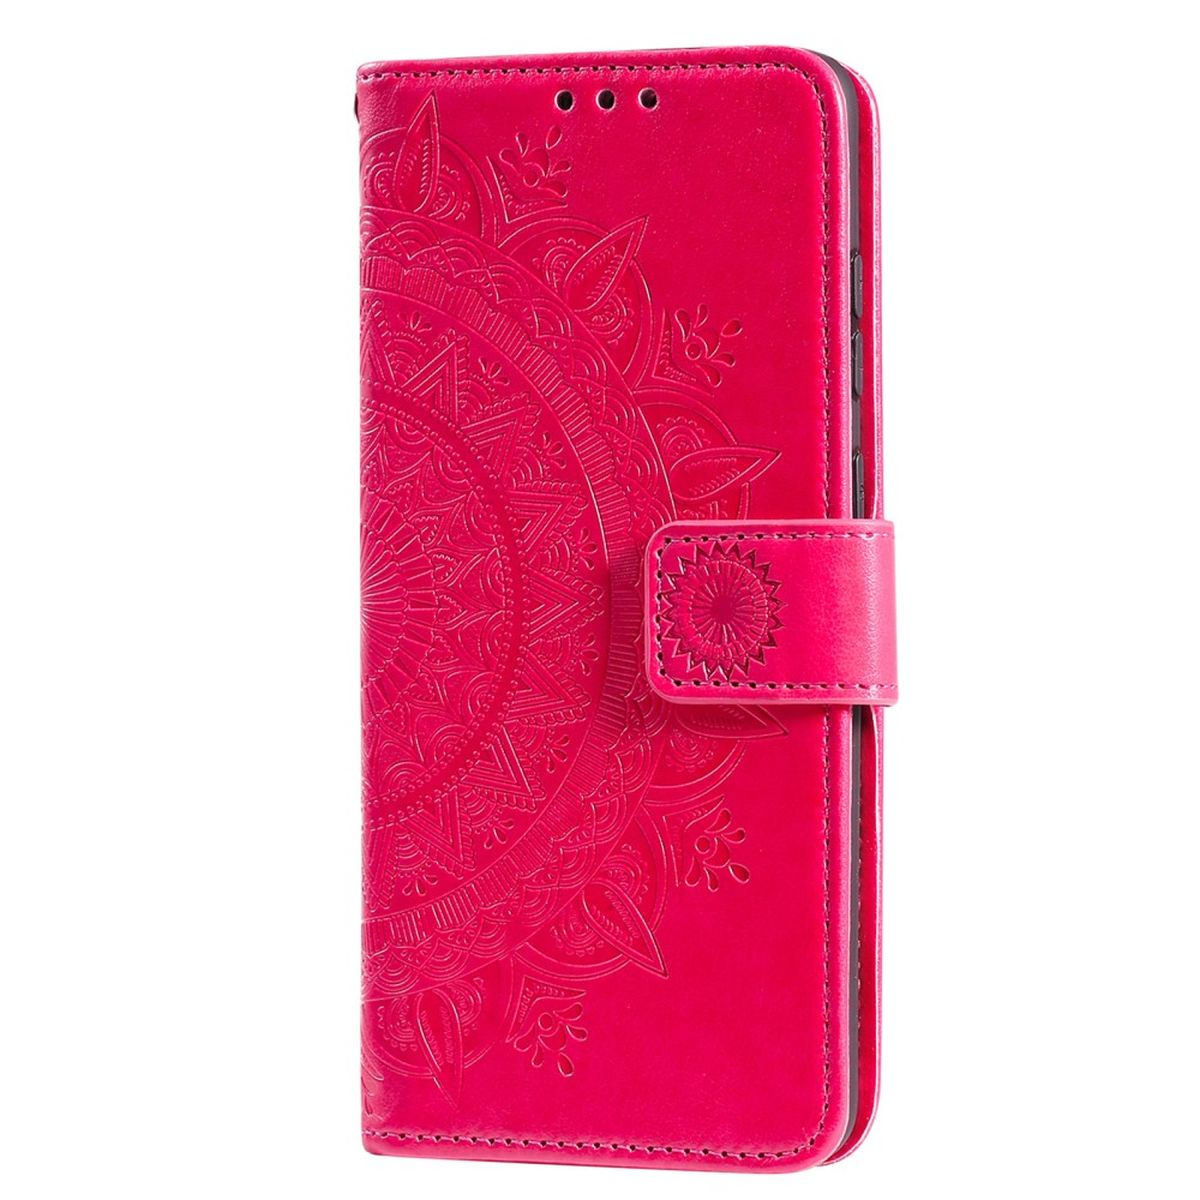 COVERKINGZ Bookcover, A04s, A13 5G/Galaxy Klapphülle Mandala Muster, Samsung, Galaxy mit Pink